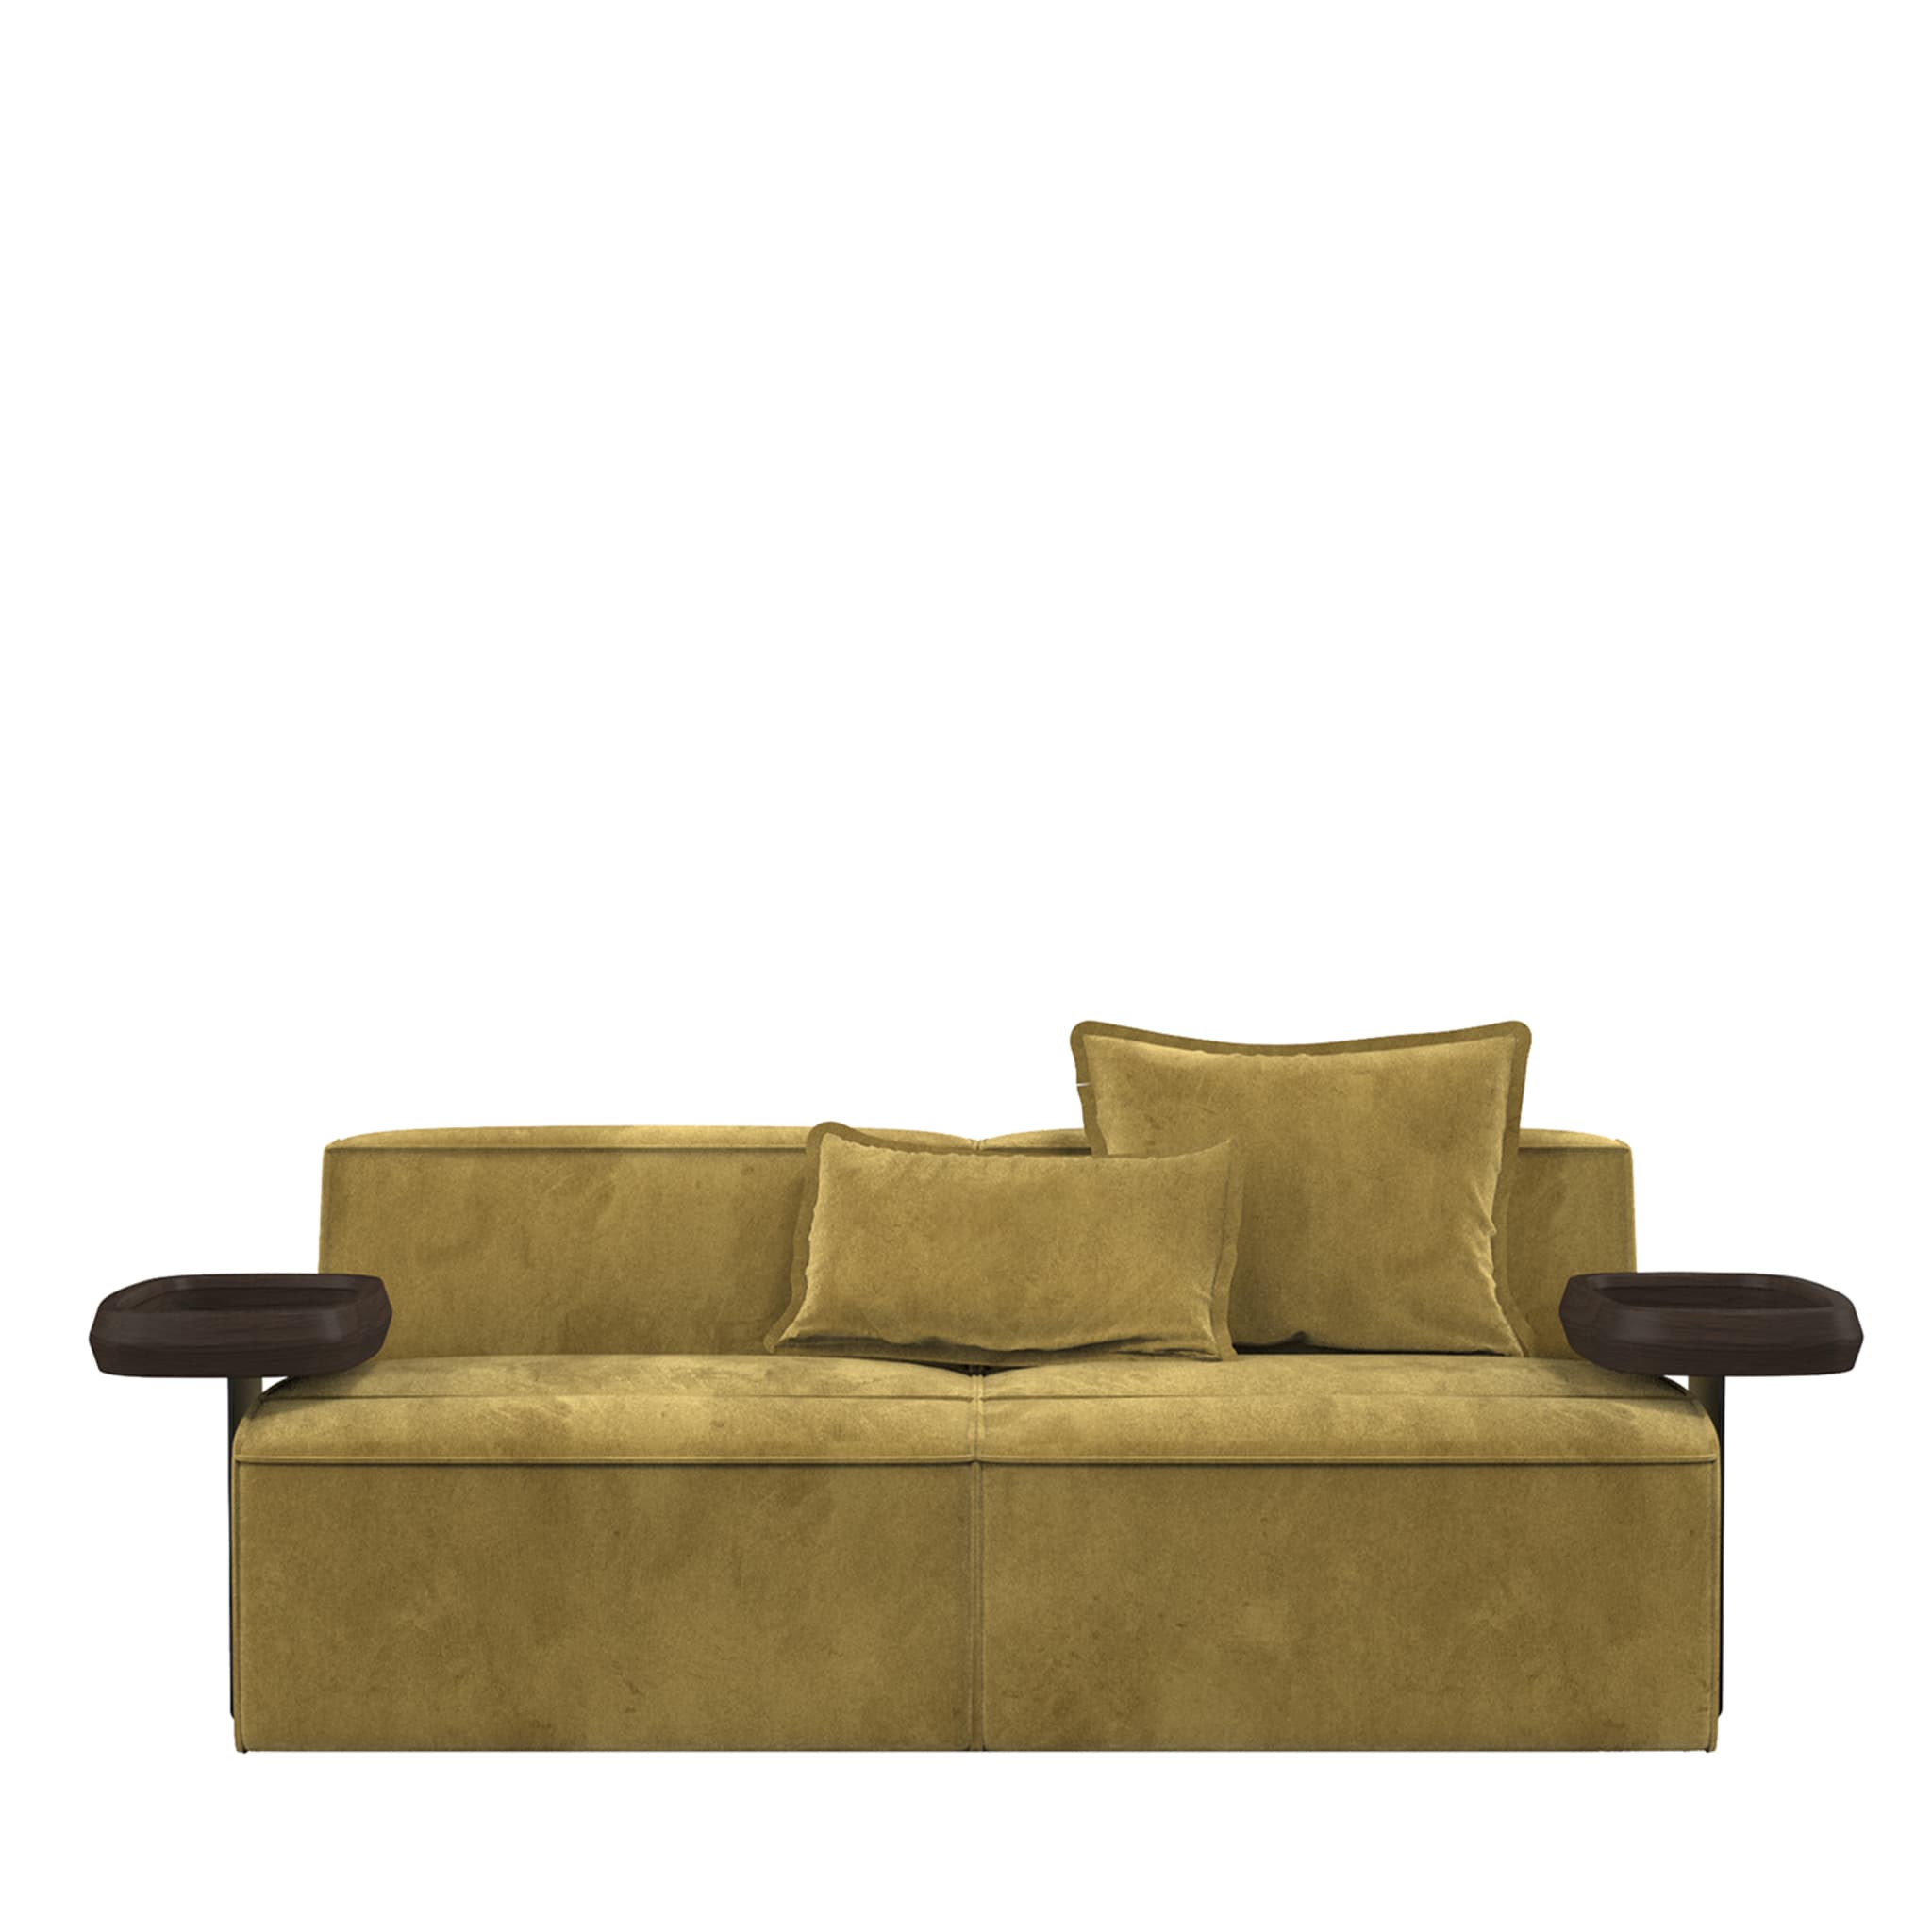 Infinito Small Green Sofa with Side Tables by Lorenza Bozzoli - Main view